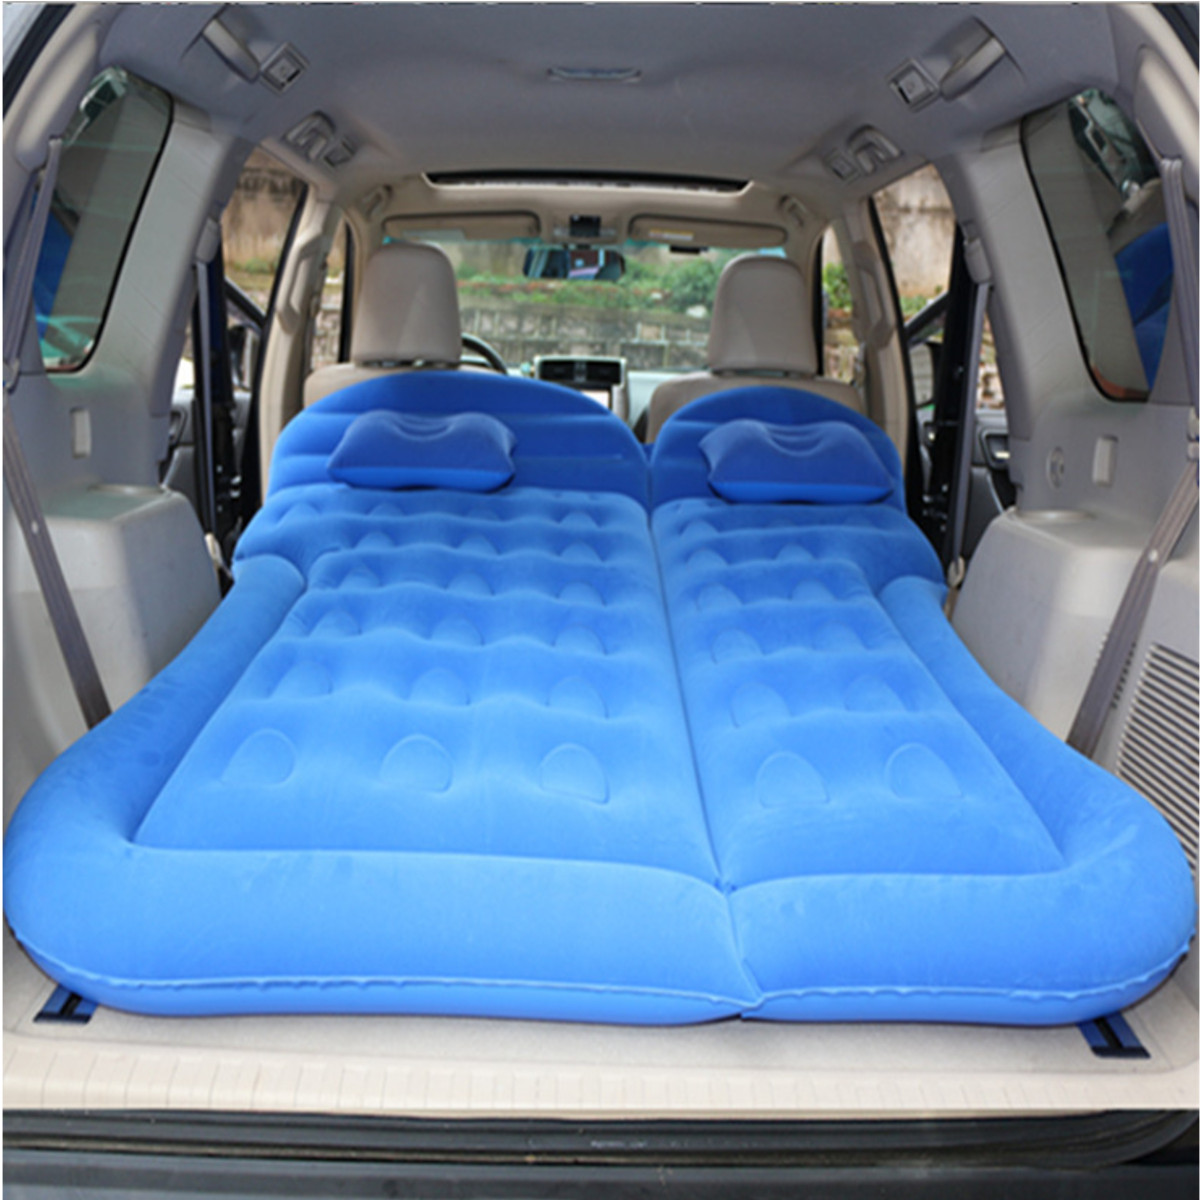 180x130cm-Multifunctional-Inflatable-Car-Air-Mattress-Durable-Back-Seat-Cover-Travel-Bed-Moisture-pr-1888970-6